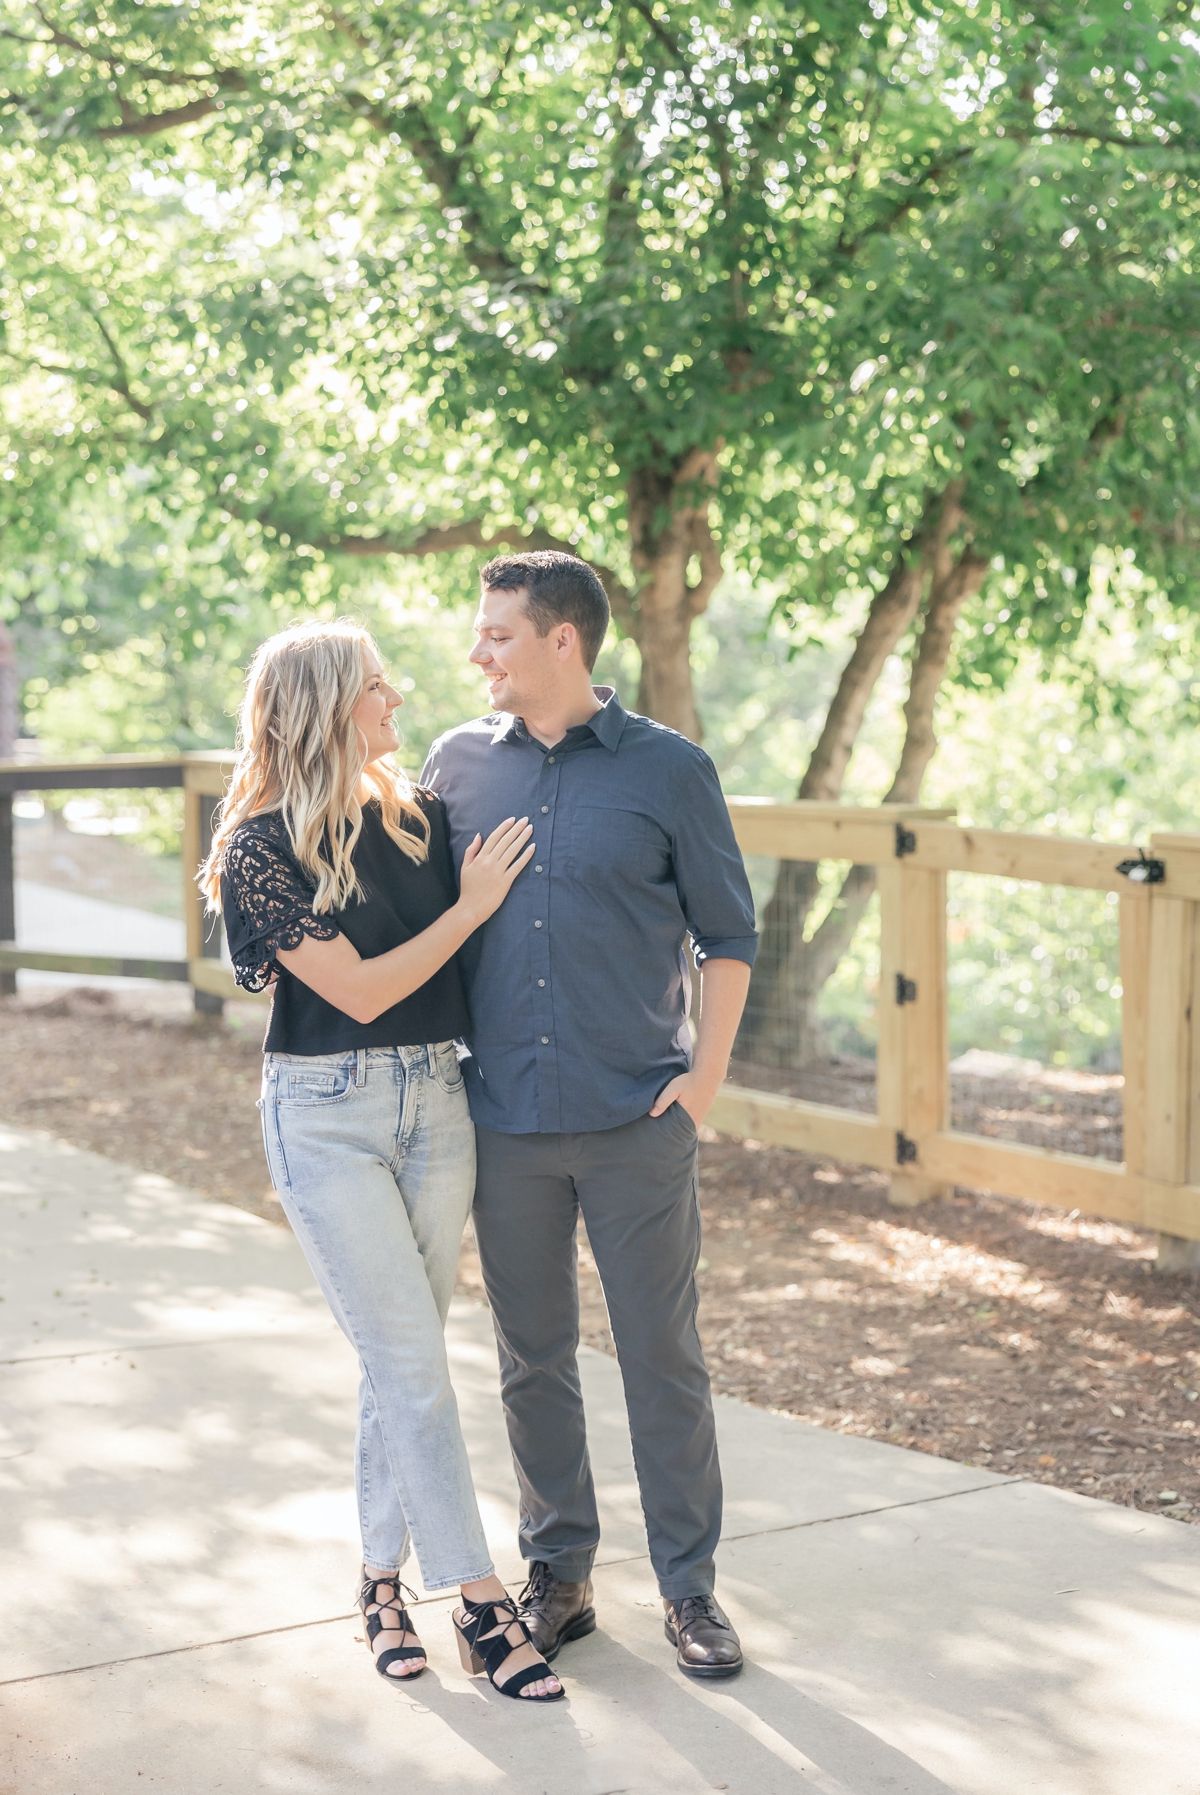 Julia with her hand on Austin's chest during their engagement session.